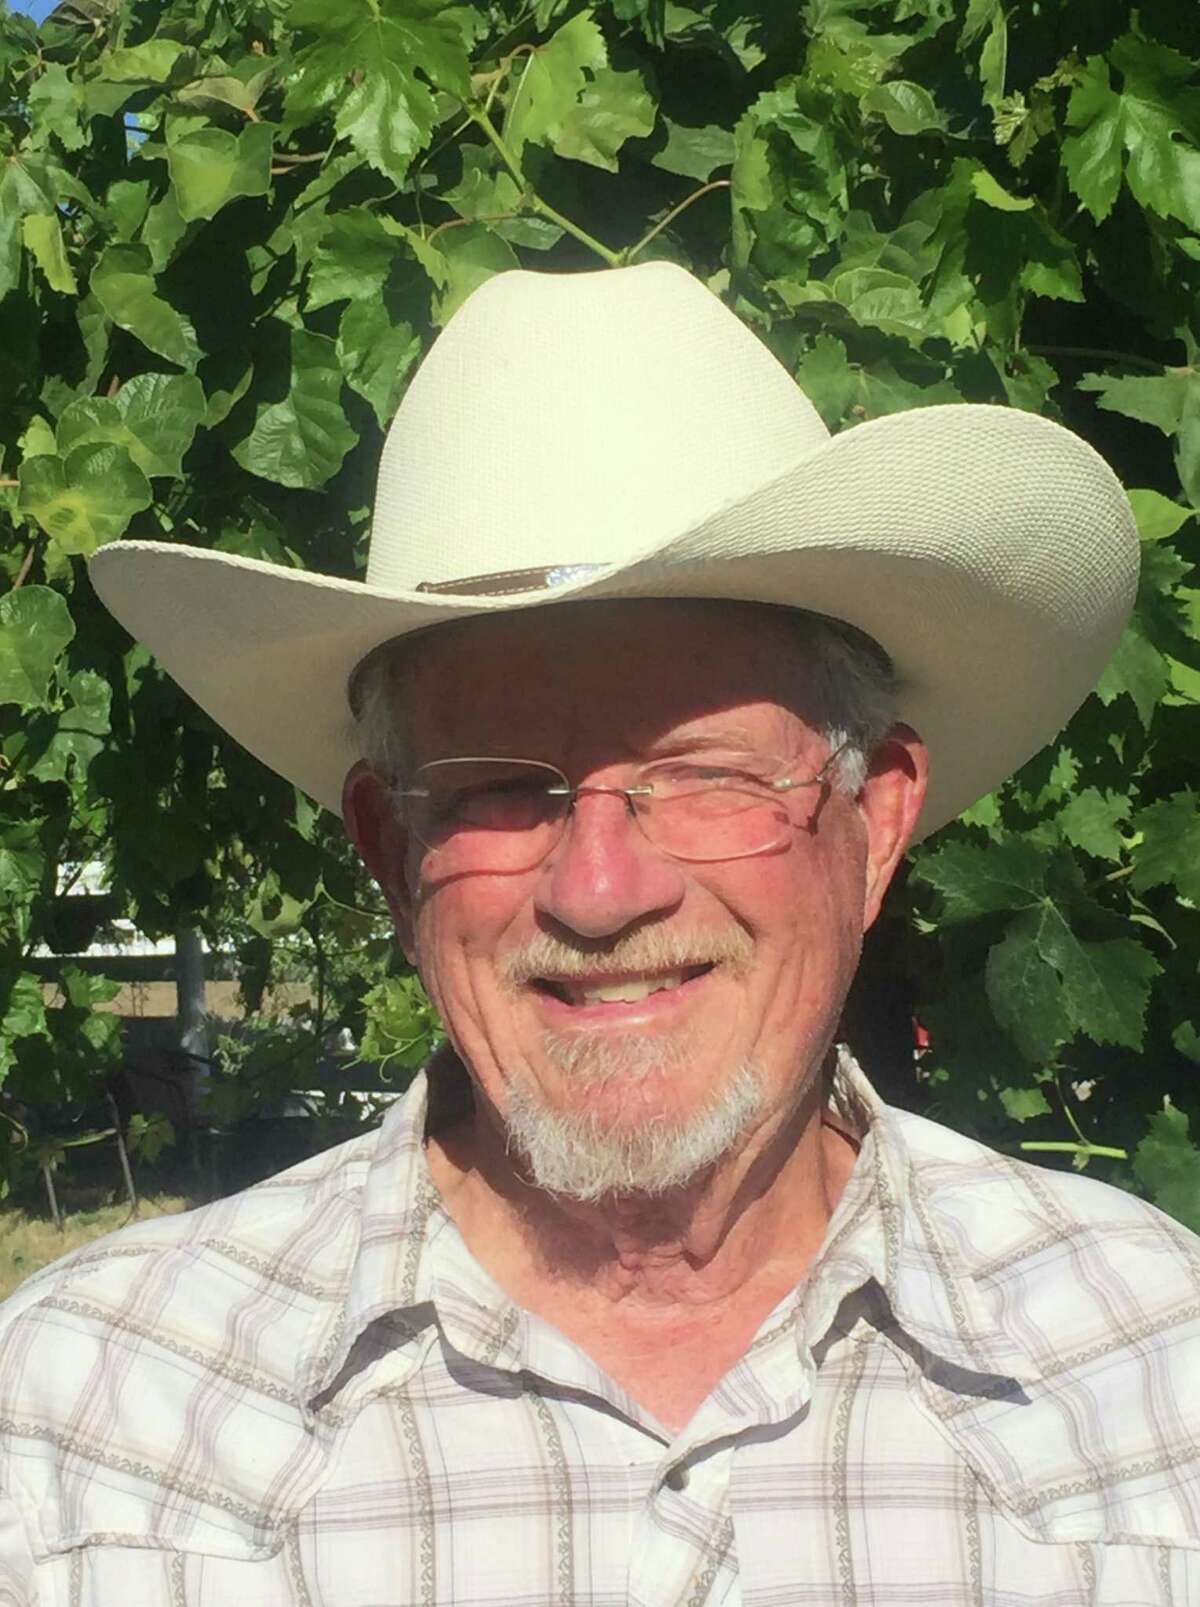 Joel Bartlett, shown at his horse ranch in Sonoma County around 2018, was known for his high jinx as a TV meteorologist.